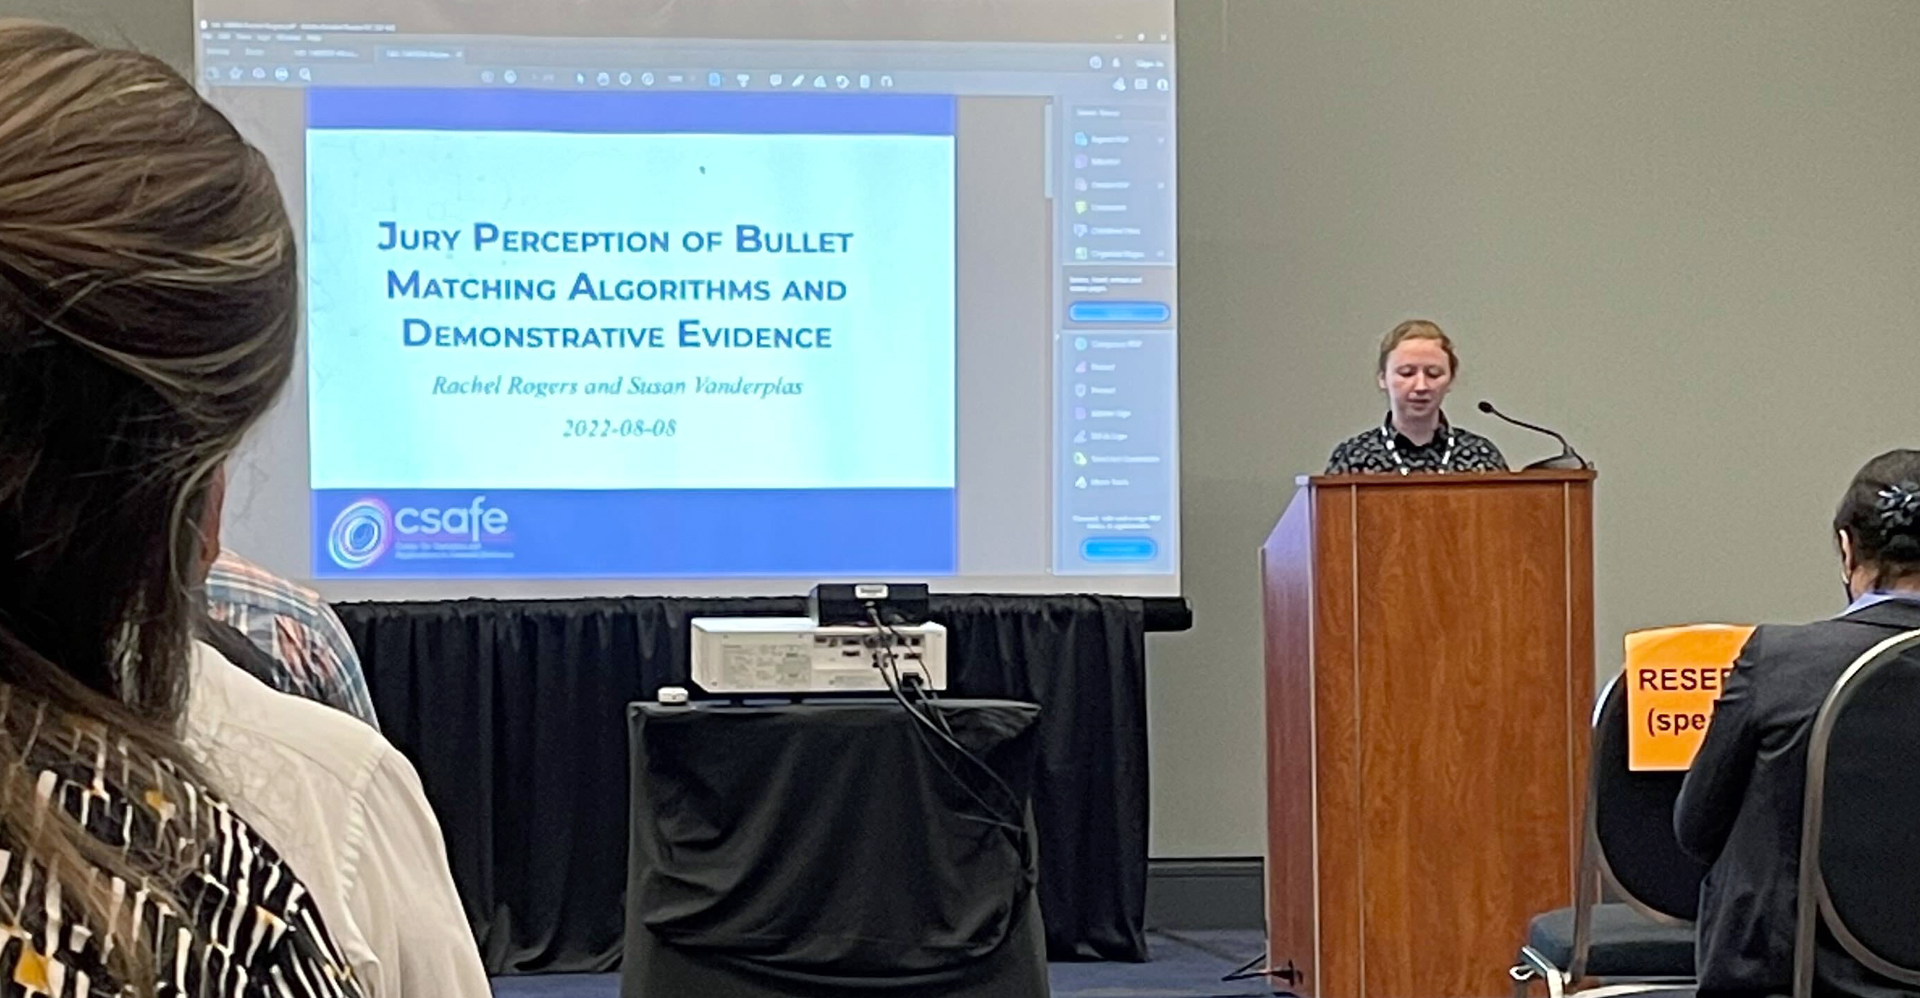 Rachel Rogers, a Ph.D. student in statistics, presented her poster, “Jury Perception of Bullet Matching Algorithms and Demonstrative Evidence,” during a speed session at the Joint Statistical Meetings.